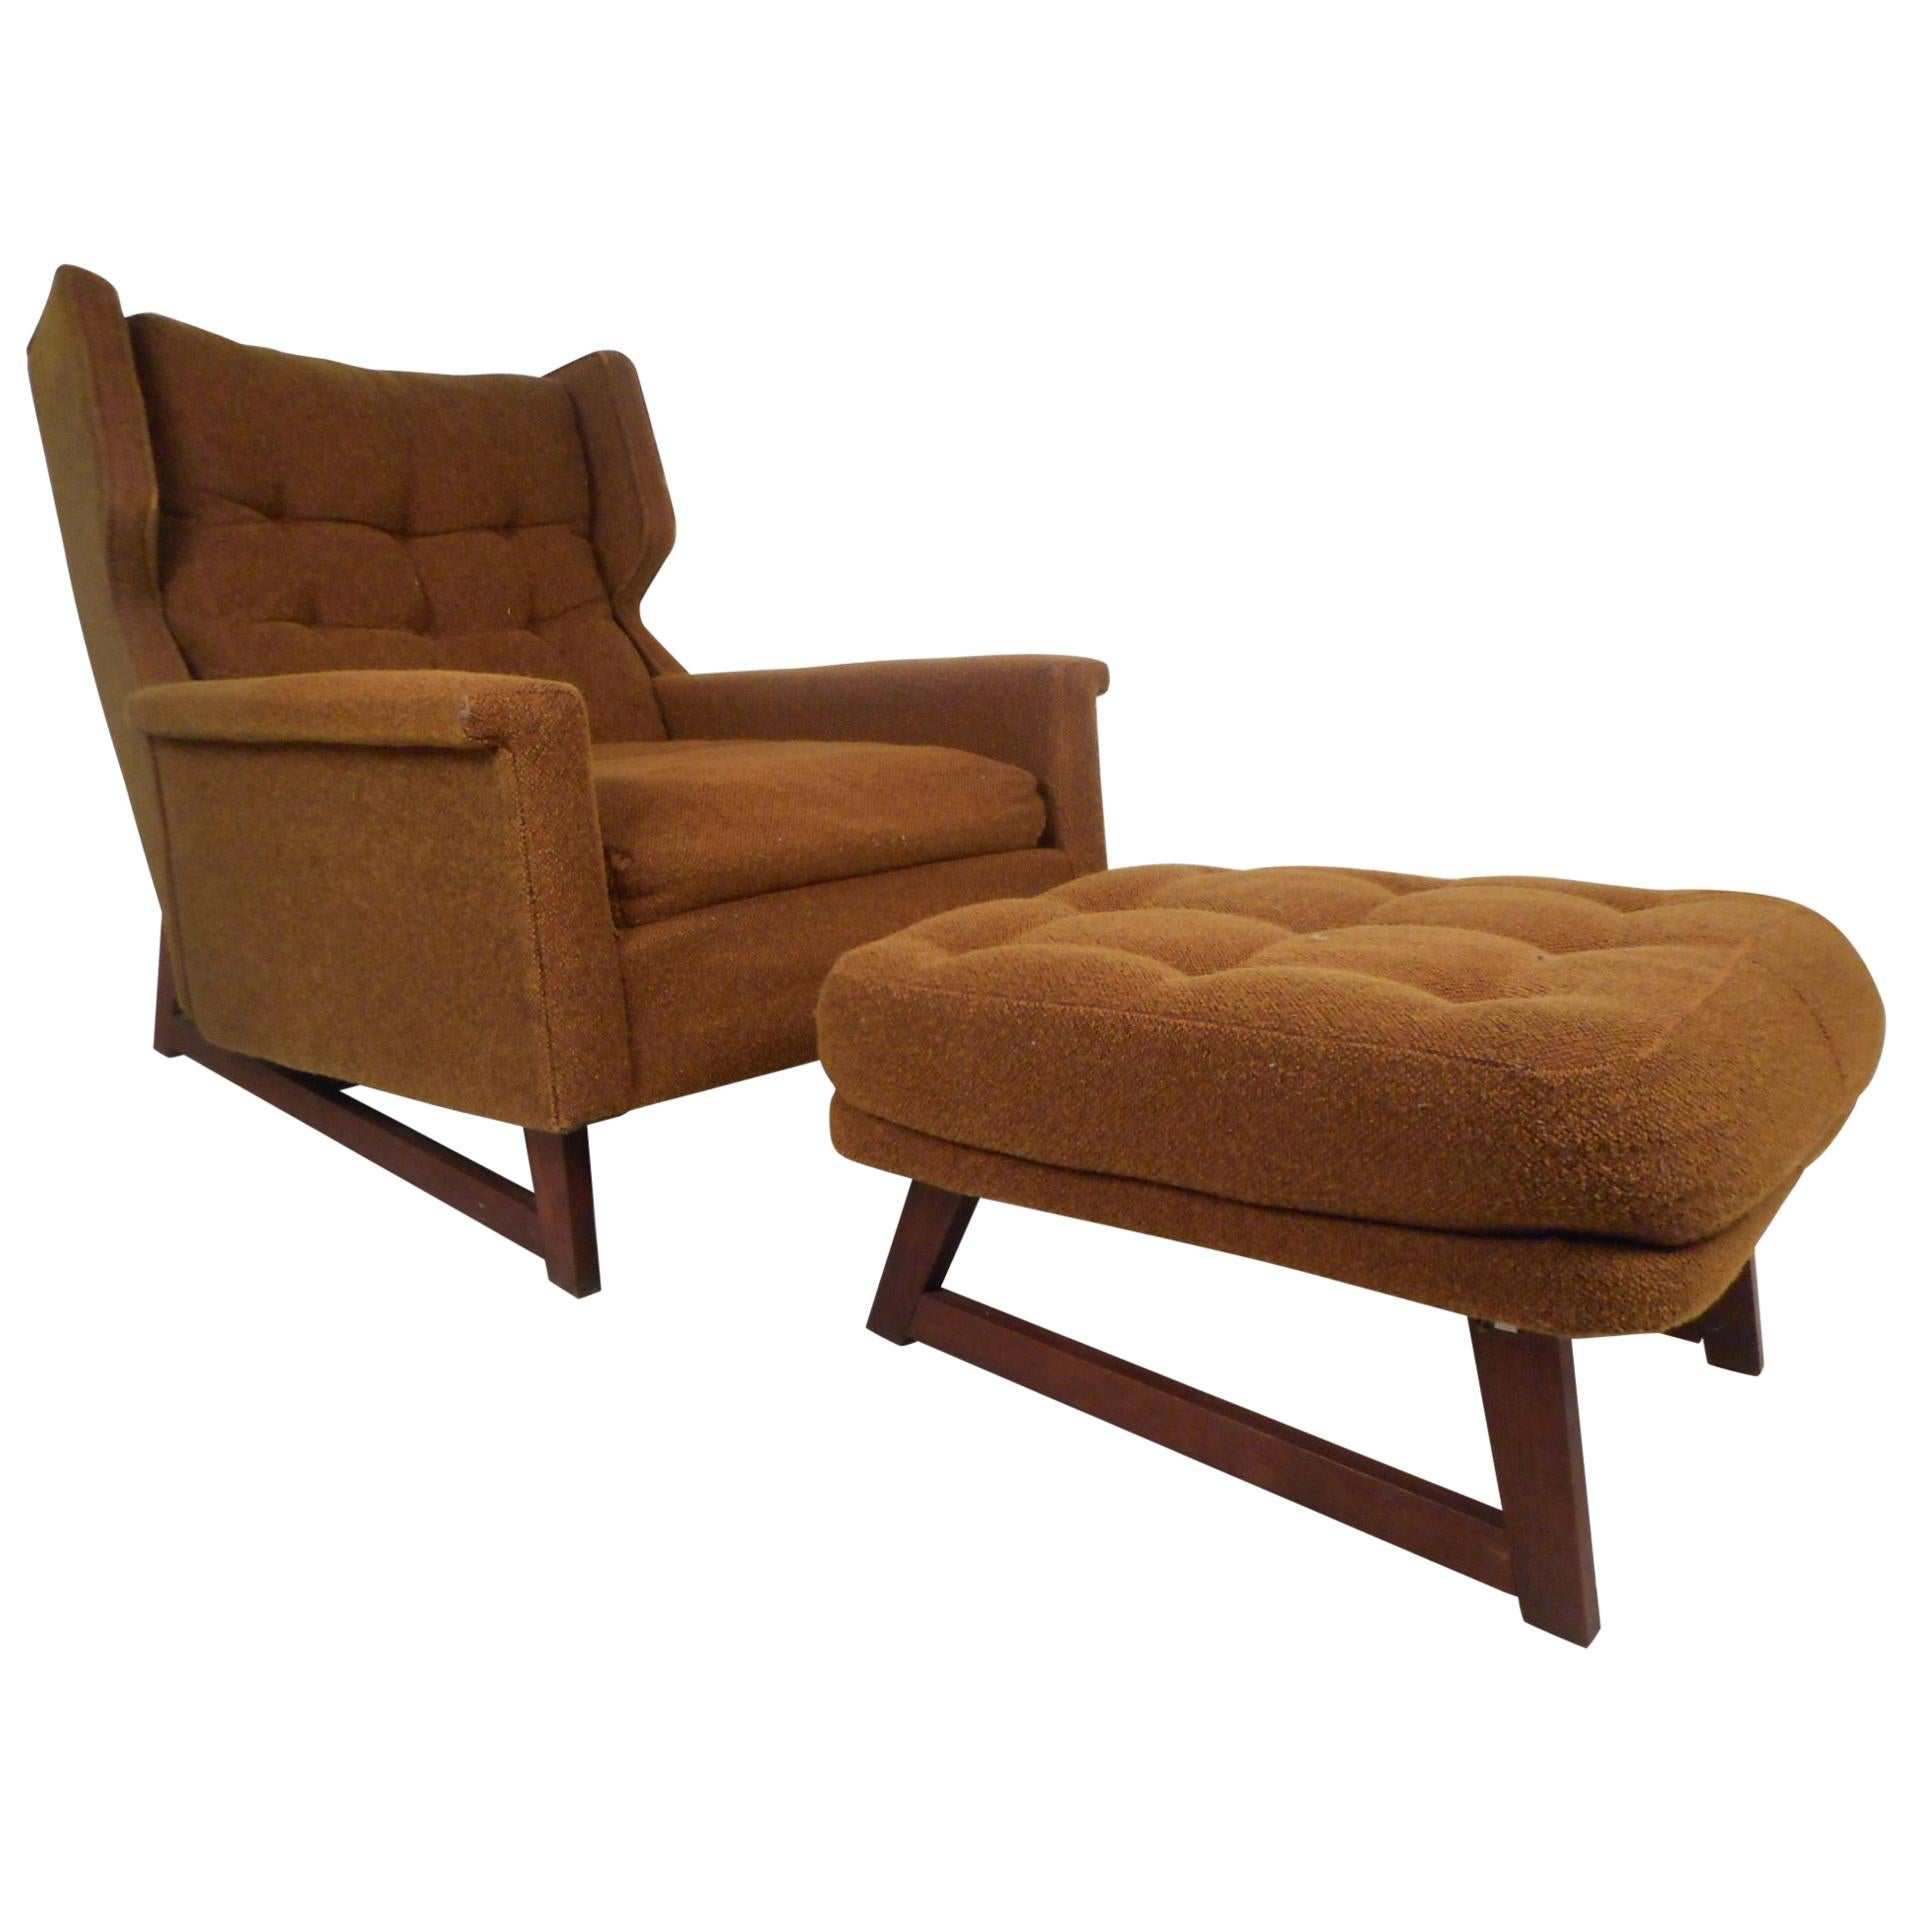 Midcentury Adrian Pearsall Style Lounge Chair and Ottoman by Weiland